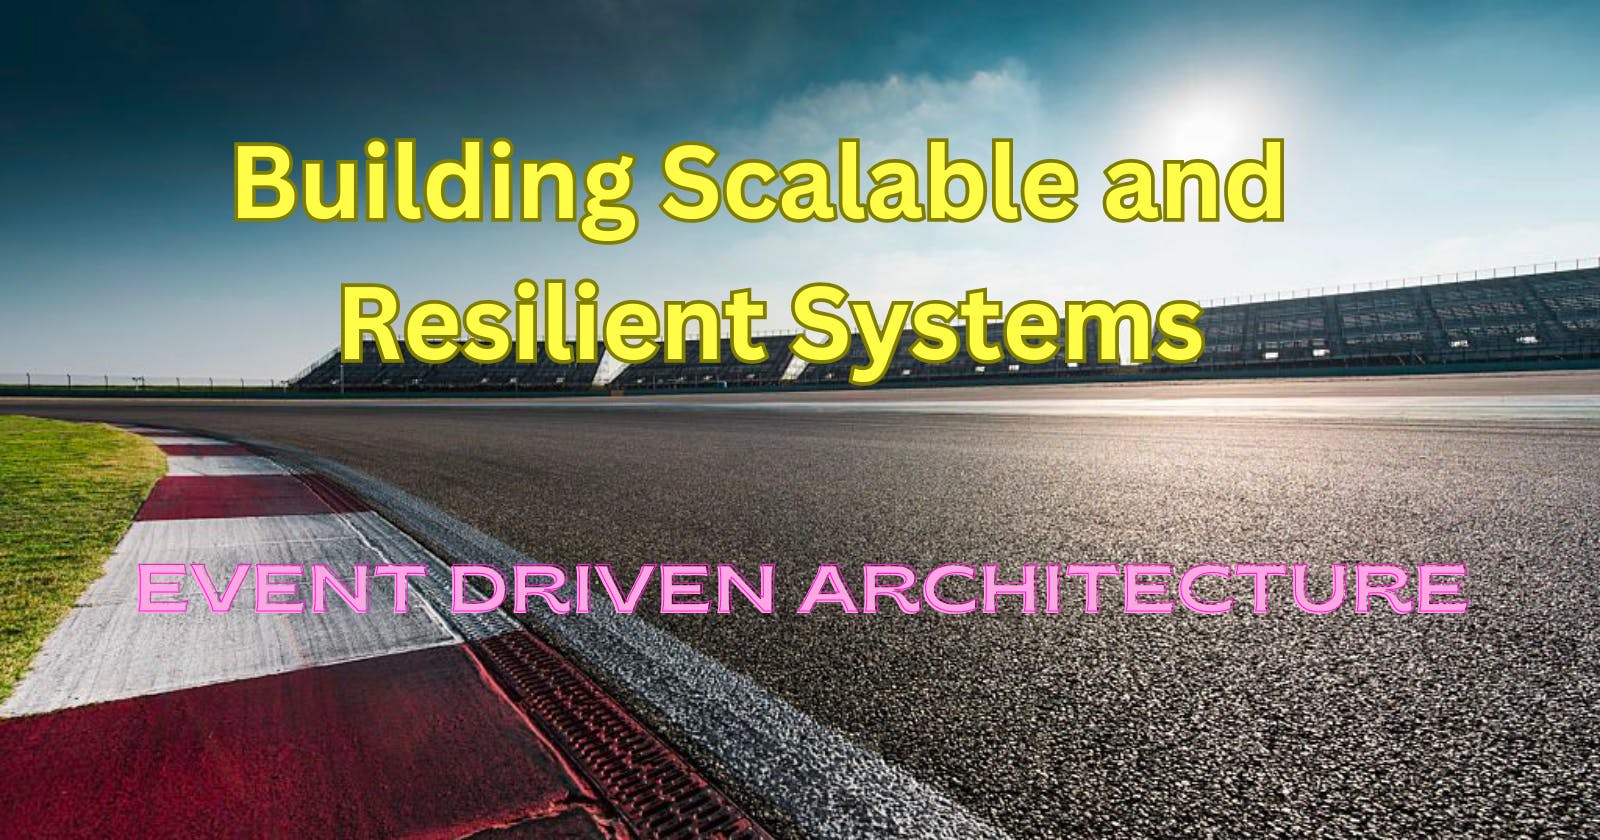 Building Scalable and Resilient Systems